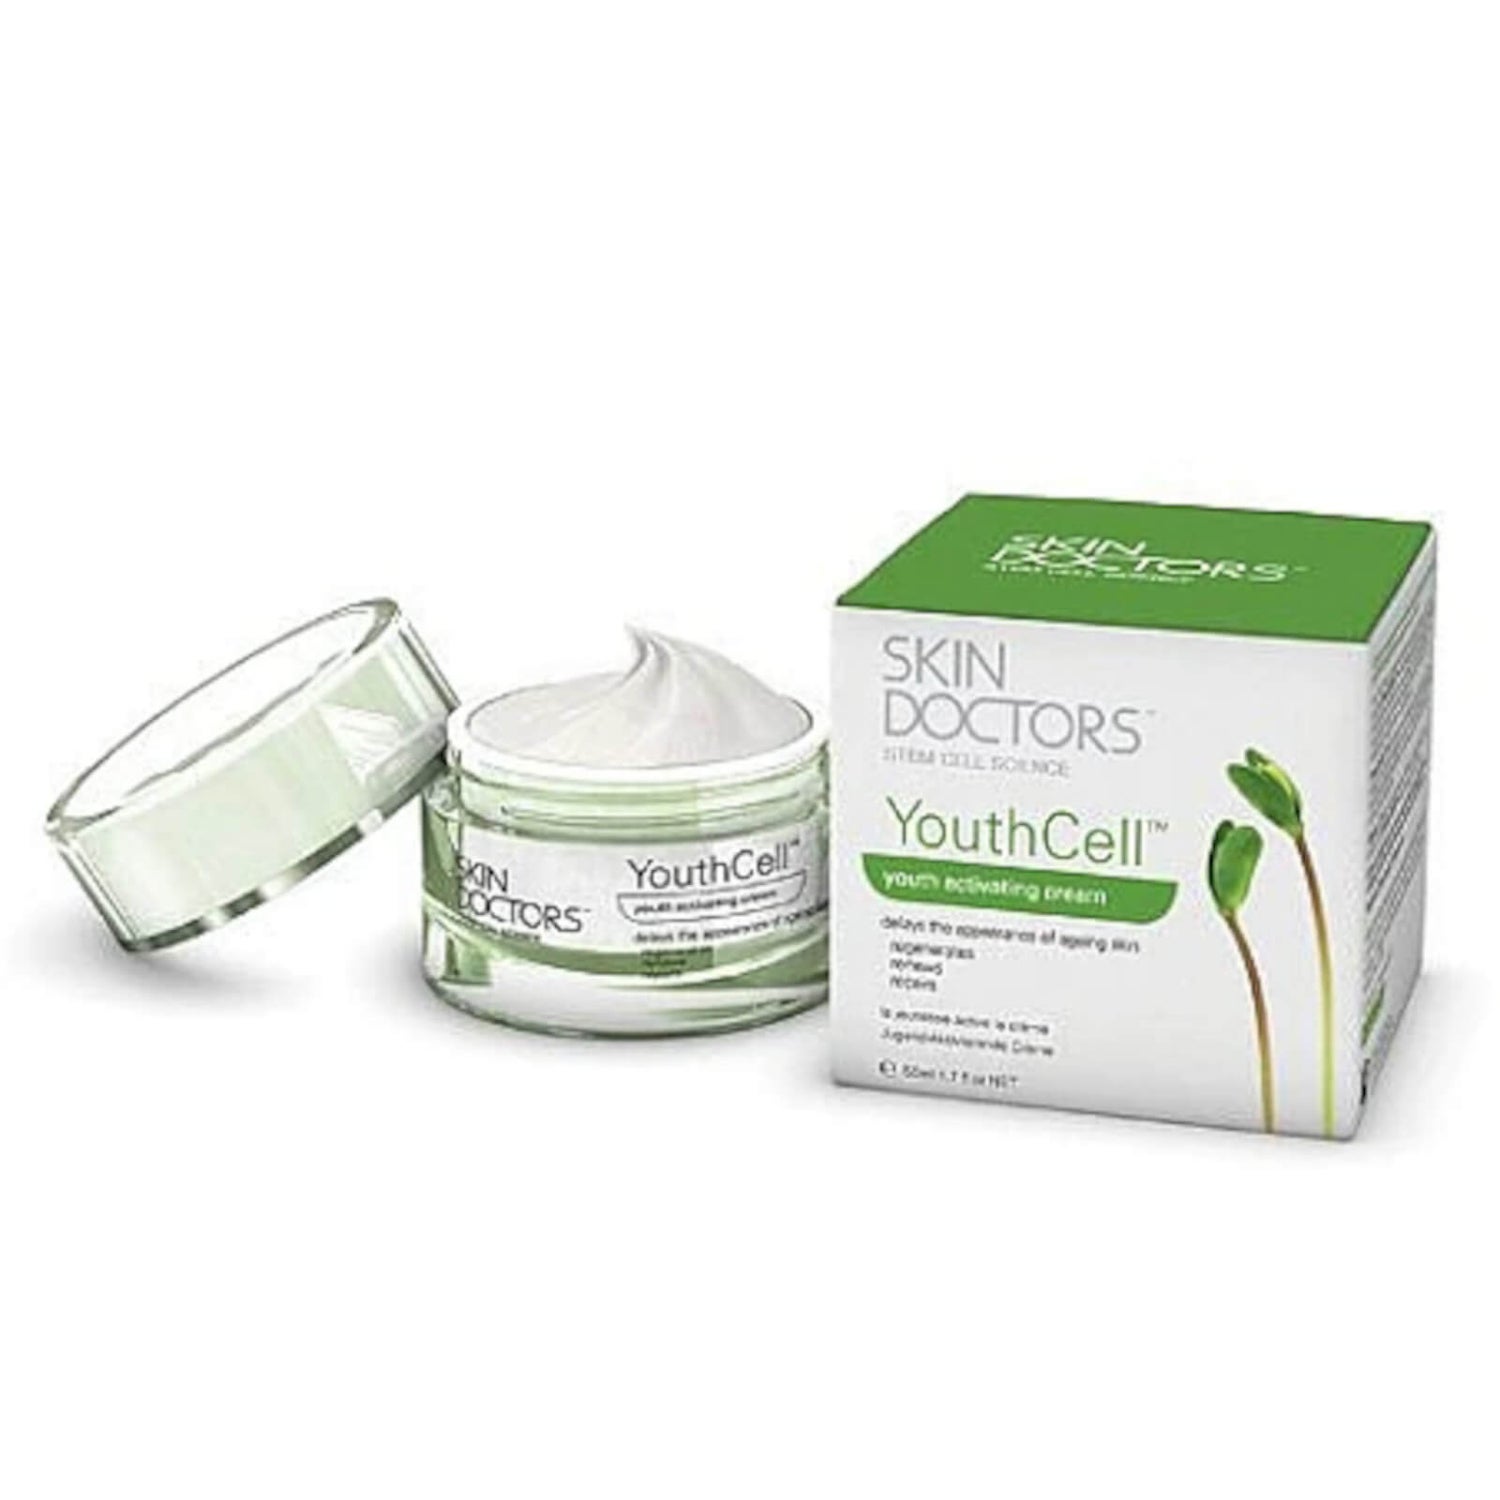 Skin Doctors Youthcell Youth Activating Cream (50ml)